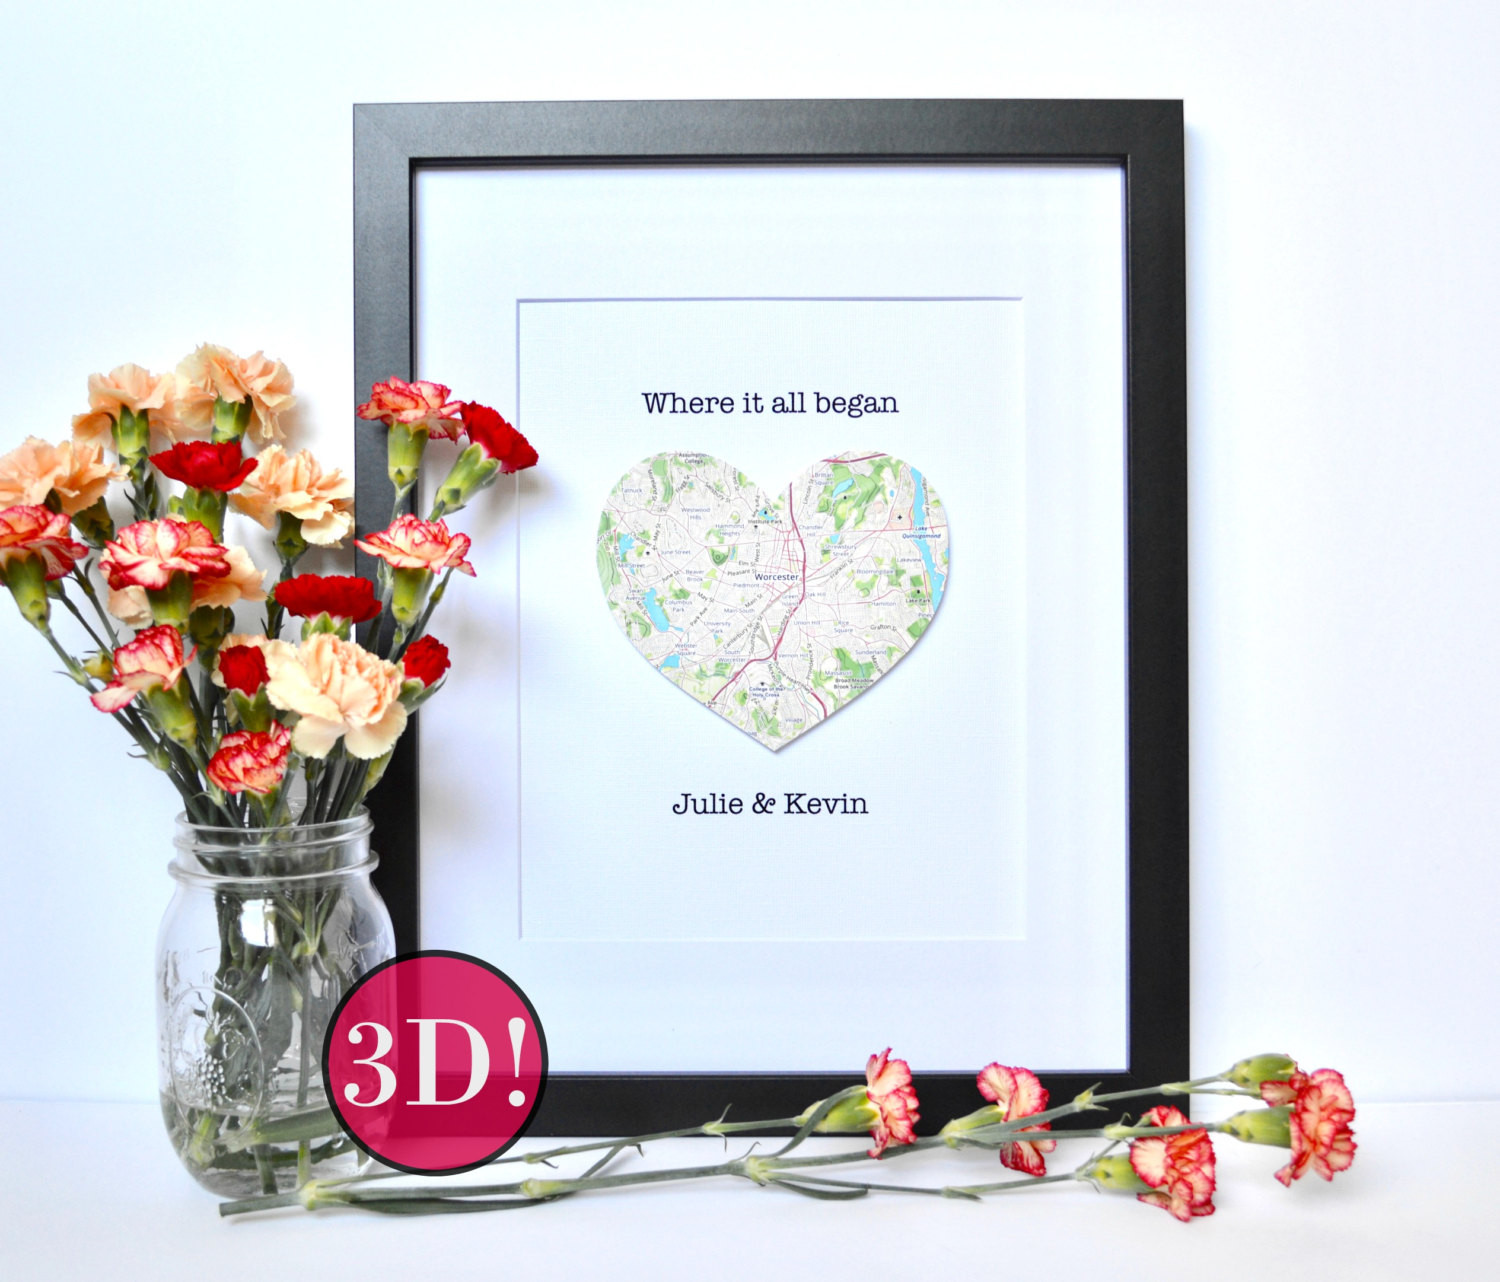 Wedding Shower Gift Ideas For Couples
 engagement t ideas for couple Bridal shower by